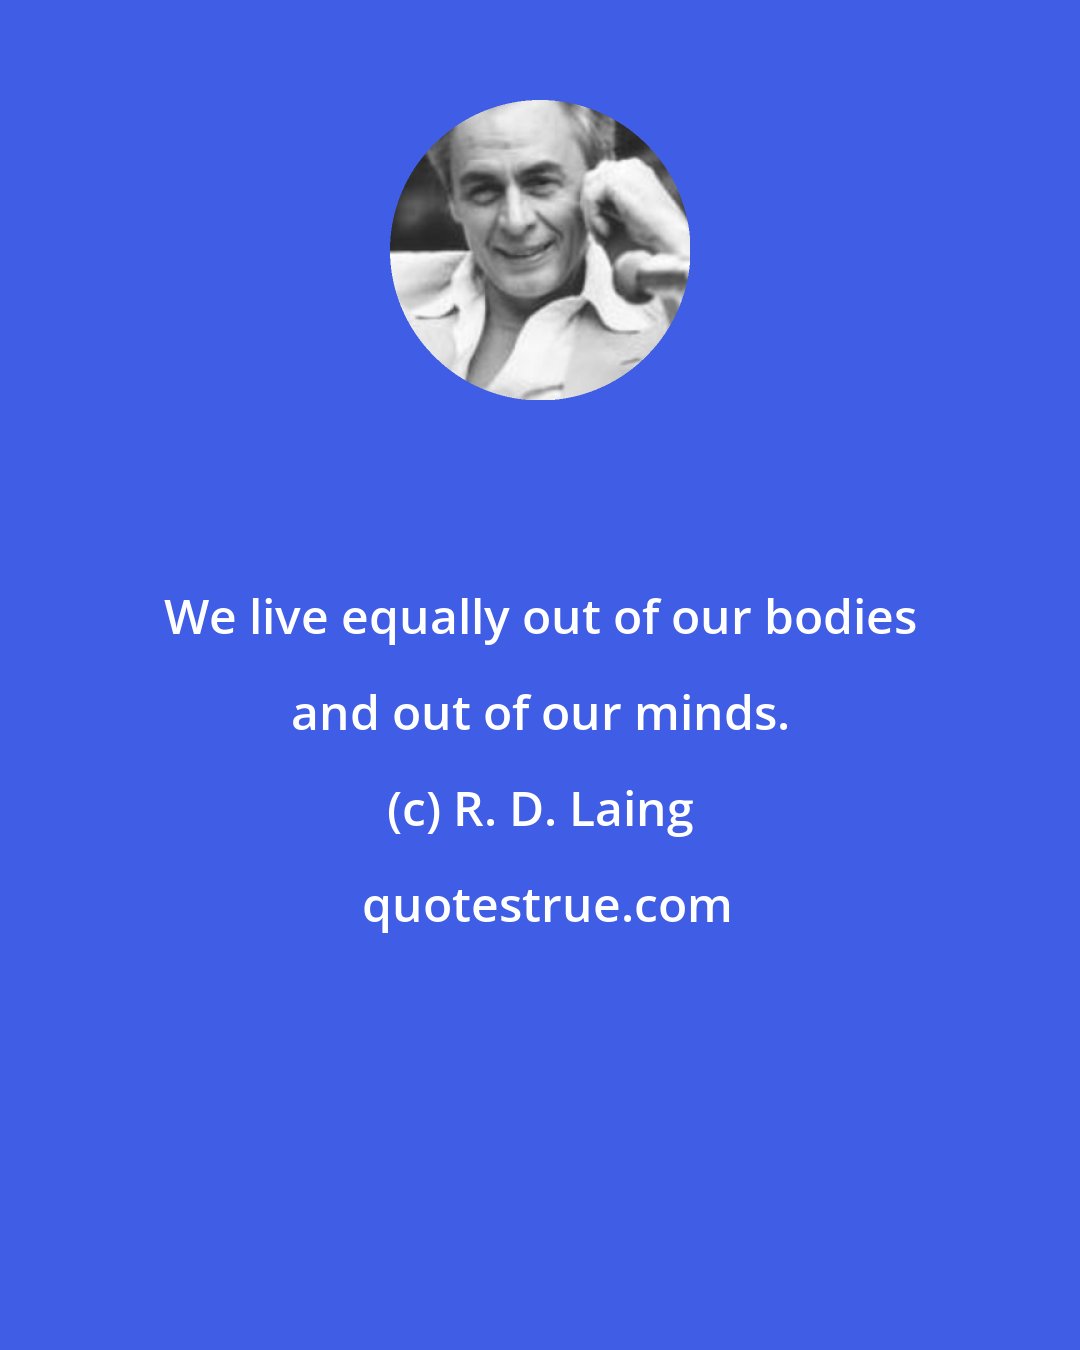 R. D. Laing: We live equally out of our bodies and out of our minds.